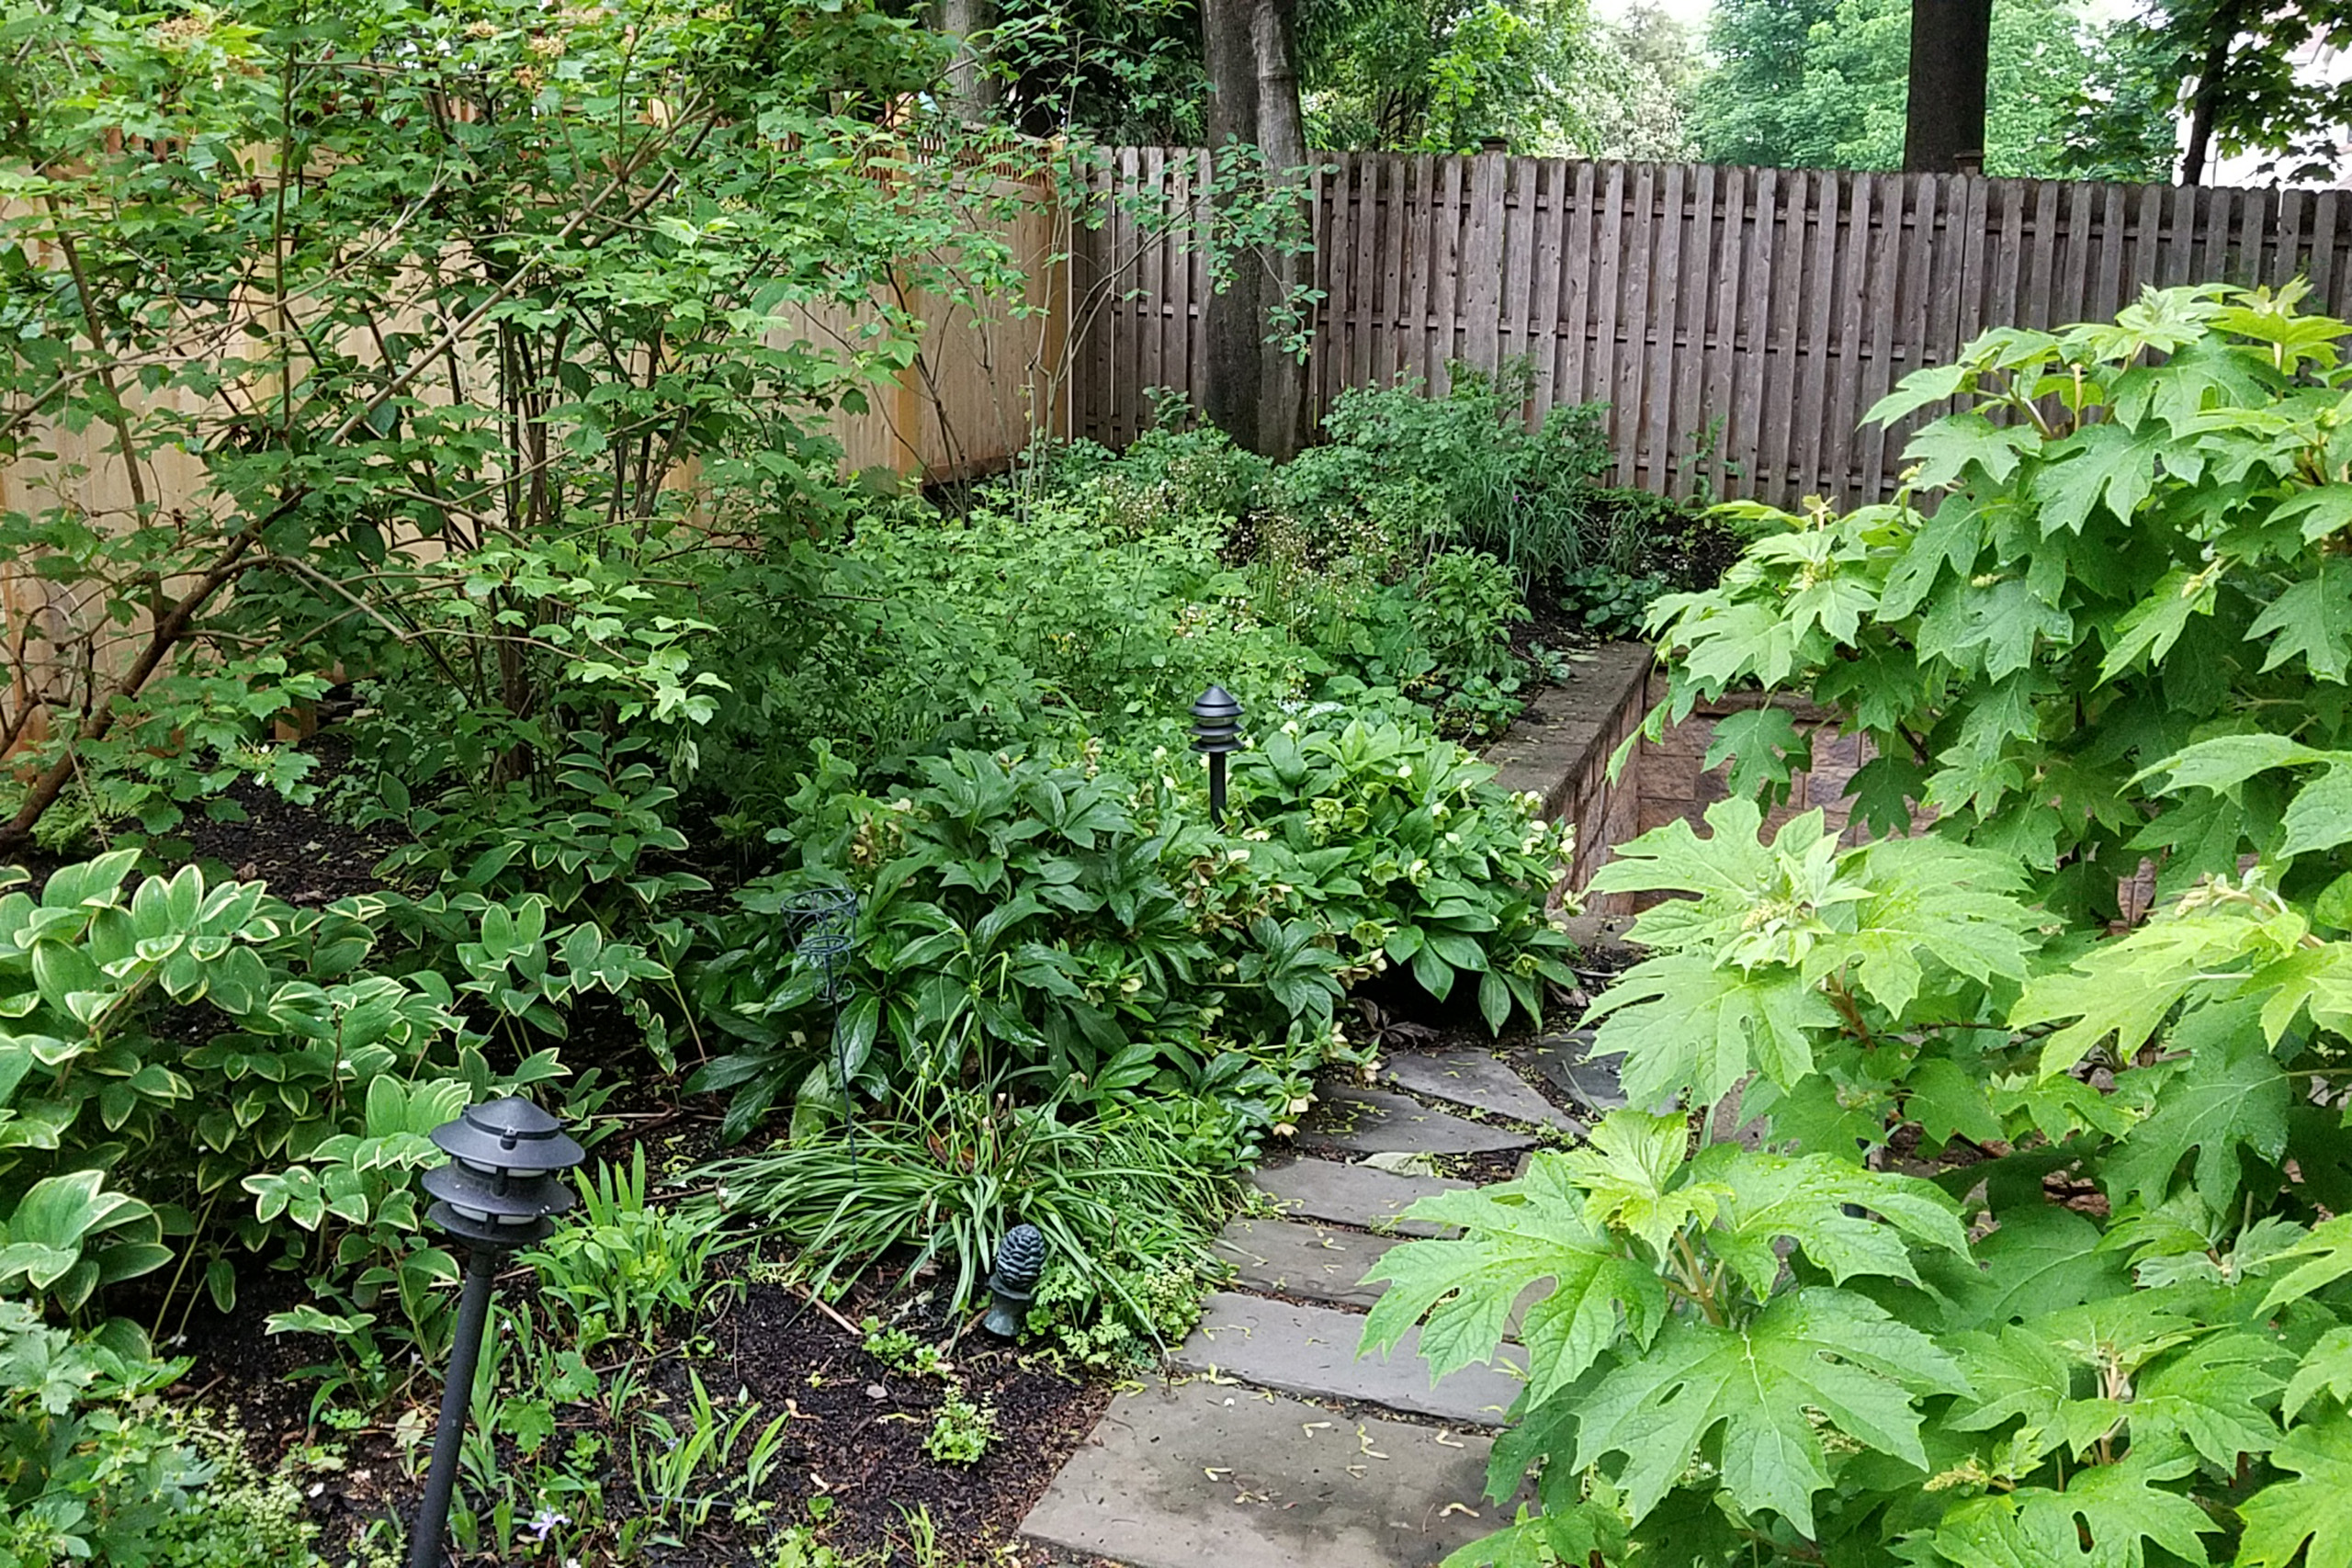 Side Yard in Summer with lush green plants and wooden fence around the exterior.